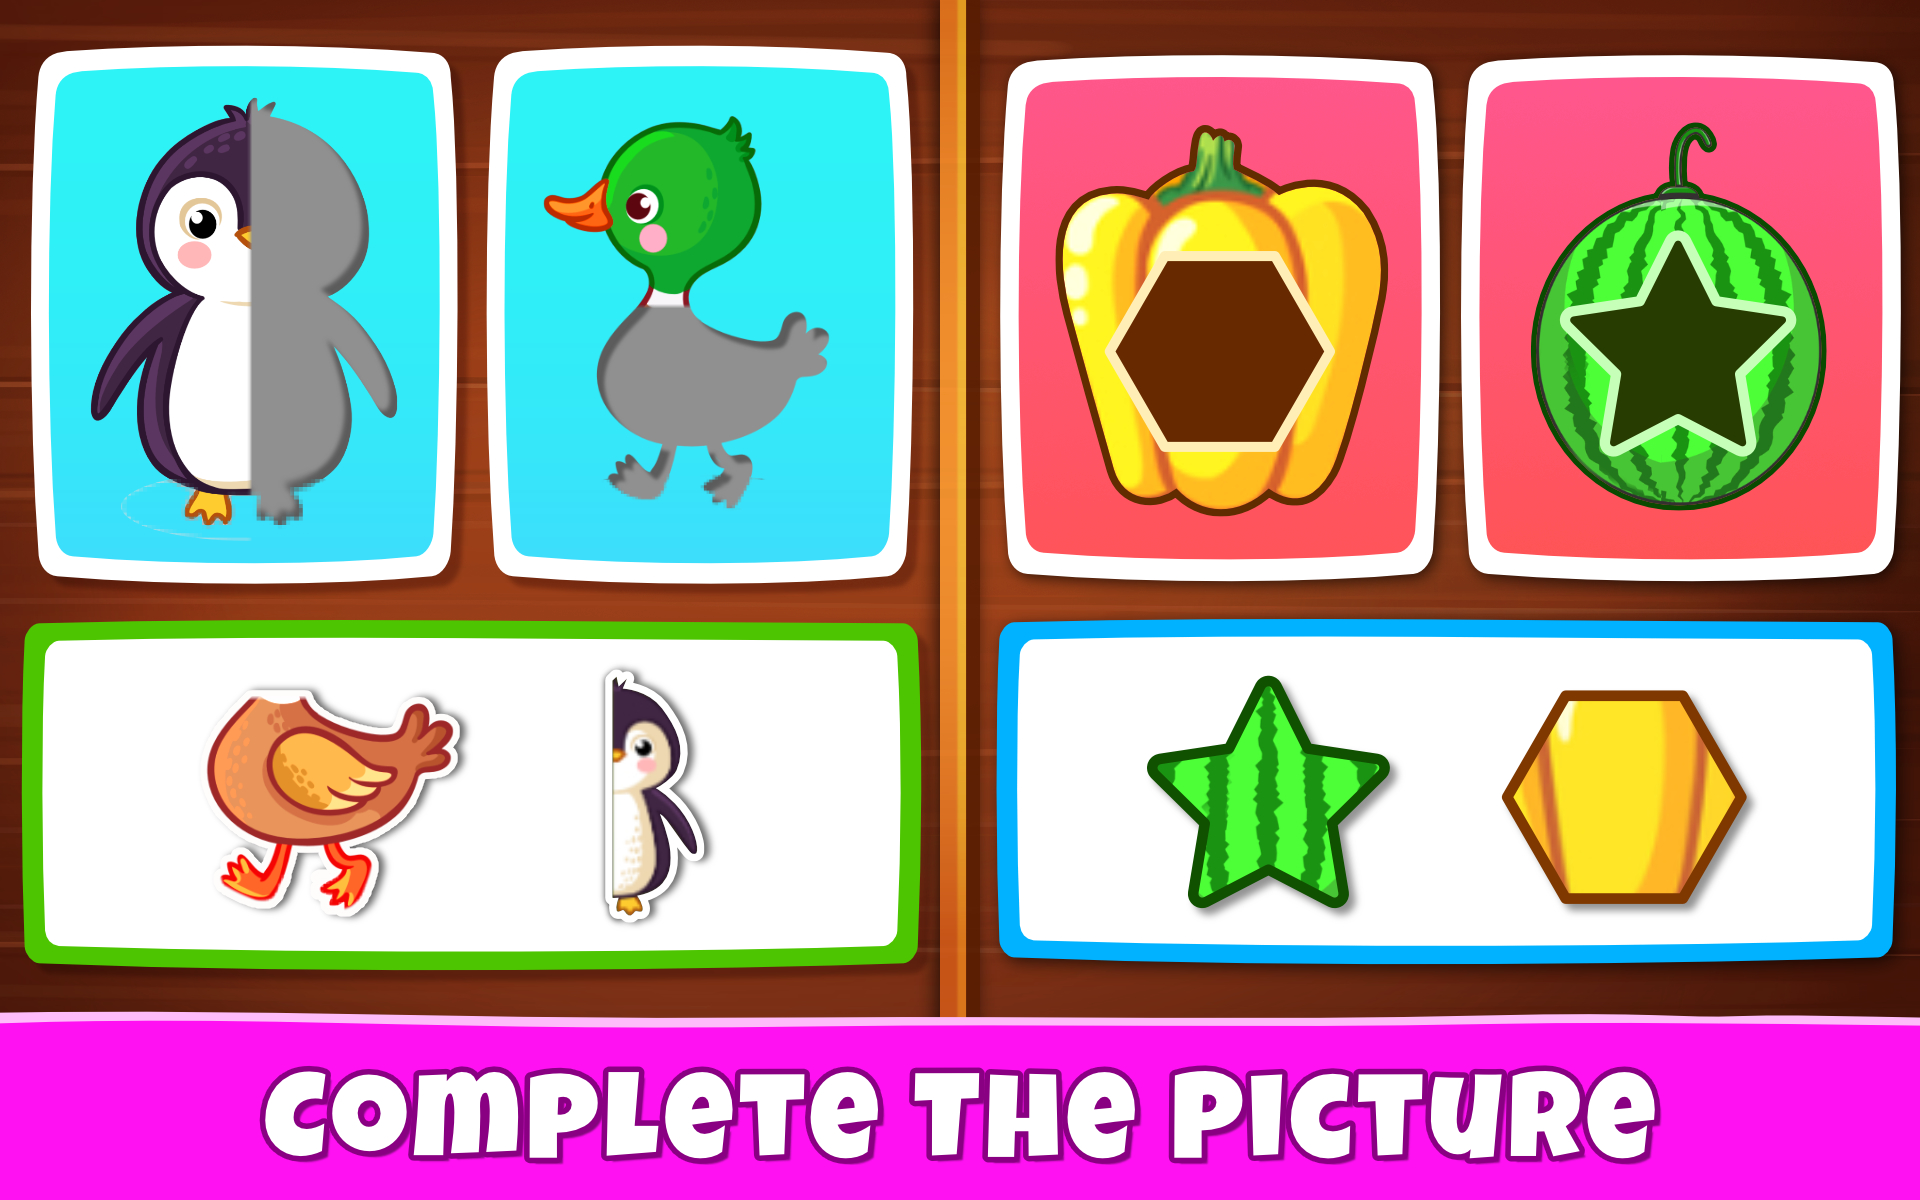 Kids Games: Learn Colors, Math, Number Counting, Puzzles & More For Toddlers Age 3 to 6